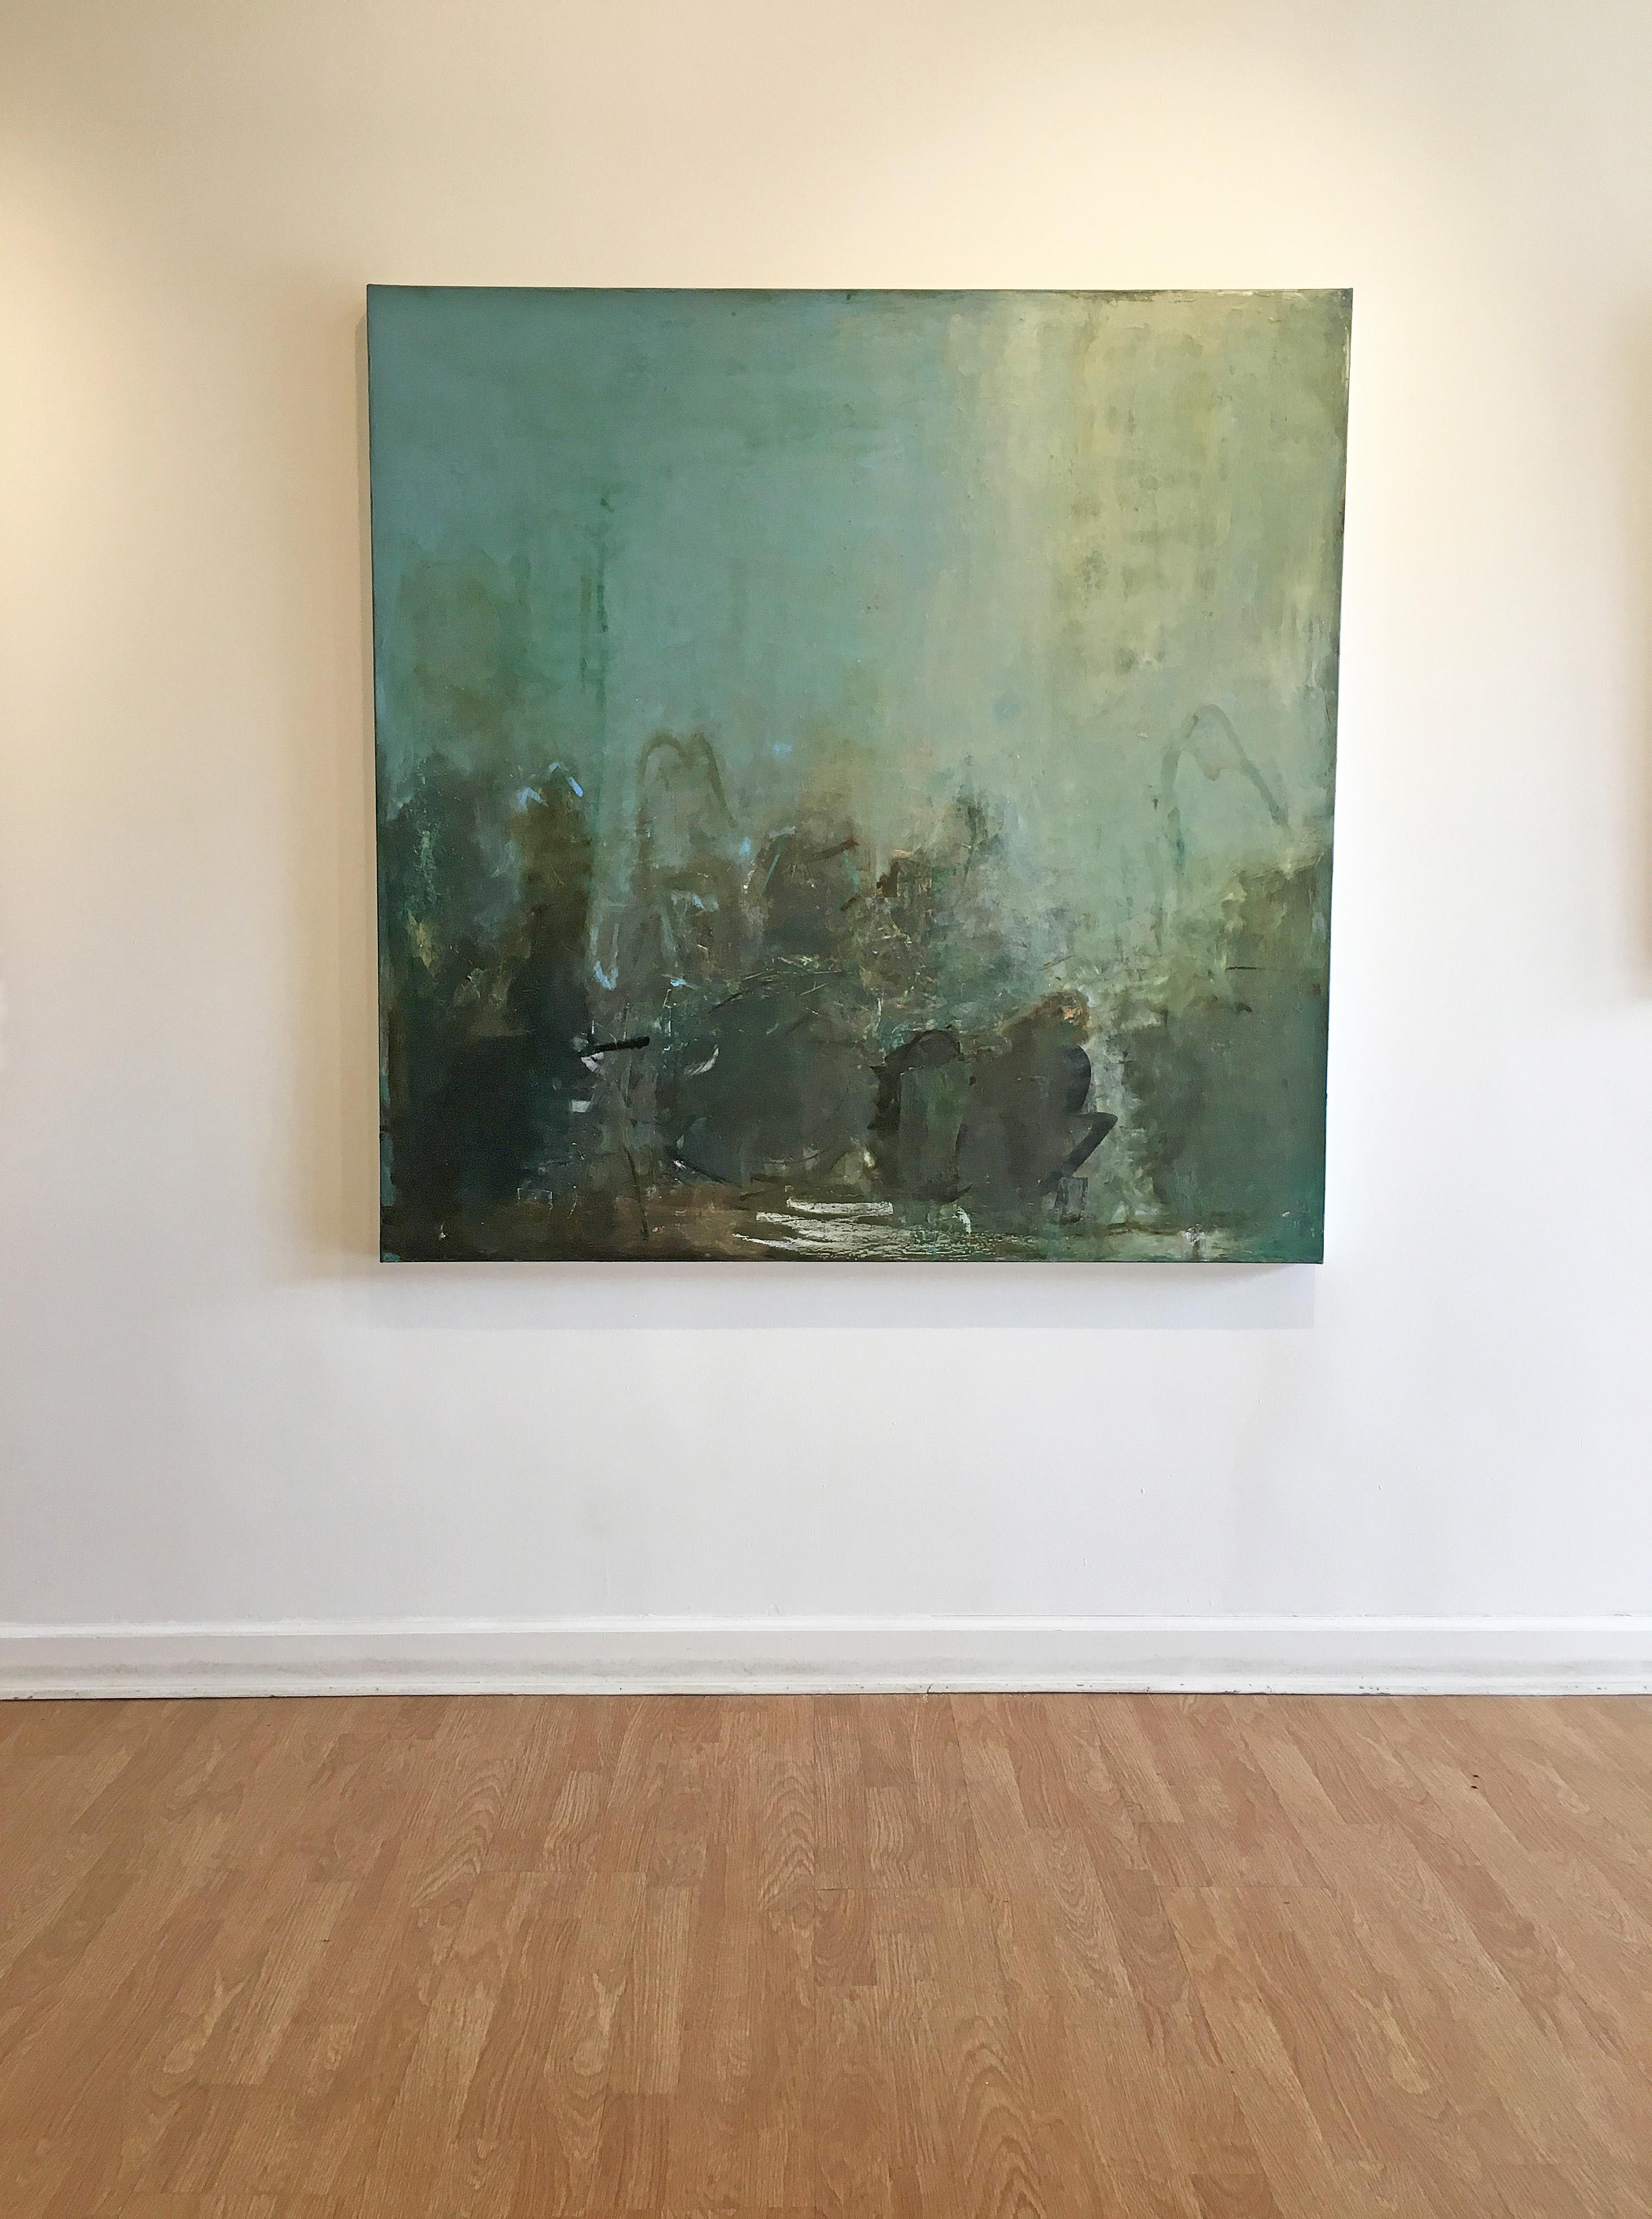 'Any Day Now' in 2018 by French artist Sandrine Kern. Oil and cold wax on canvas, 54 x 54 in. This abstracted landscape painting features a forest scene in a soft palette of colors including brown, yellow, green, blue, black, and white.

Sandrine